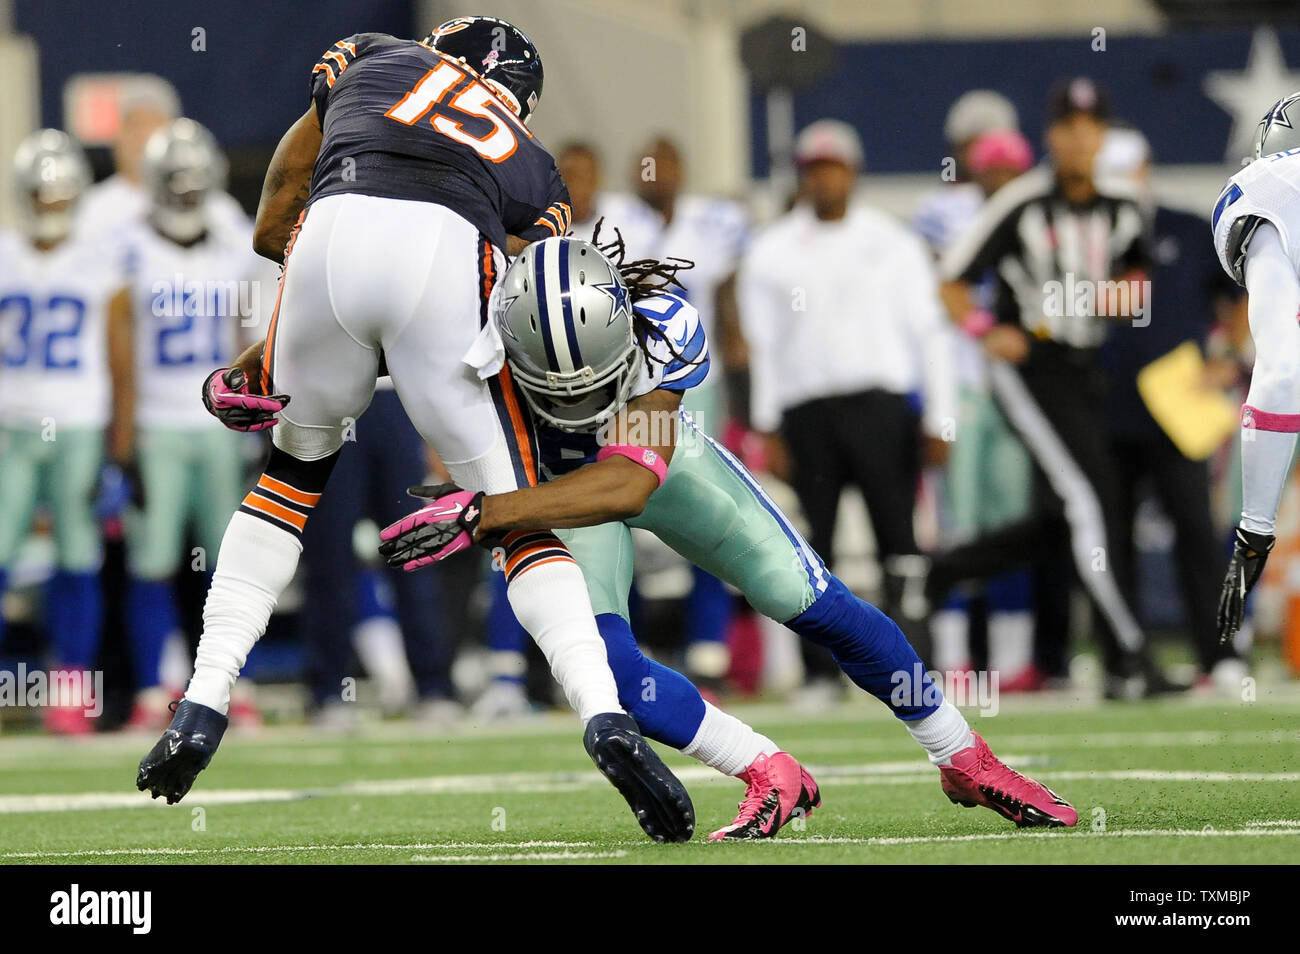 Chicago Bears receiver Brandon Marshall (15) is tackled by Dallas Cowboys  safety Danny McCray (40) after catching a short pass from Jay Cutler at  Cowboys Stadium in Arlington, Texas on October 1,